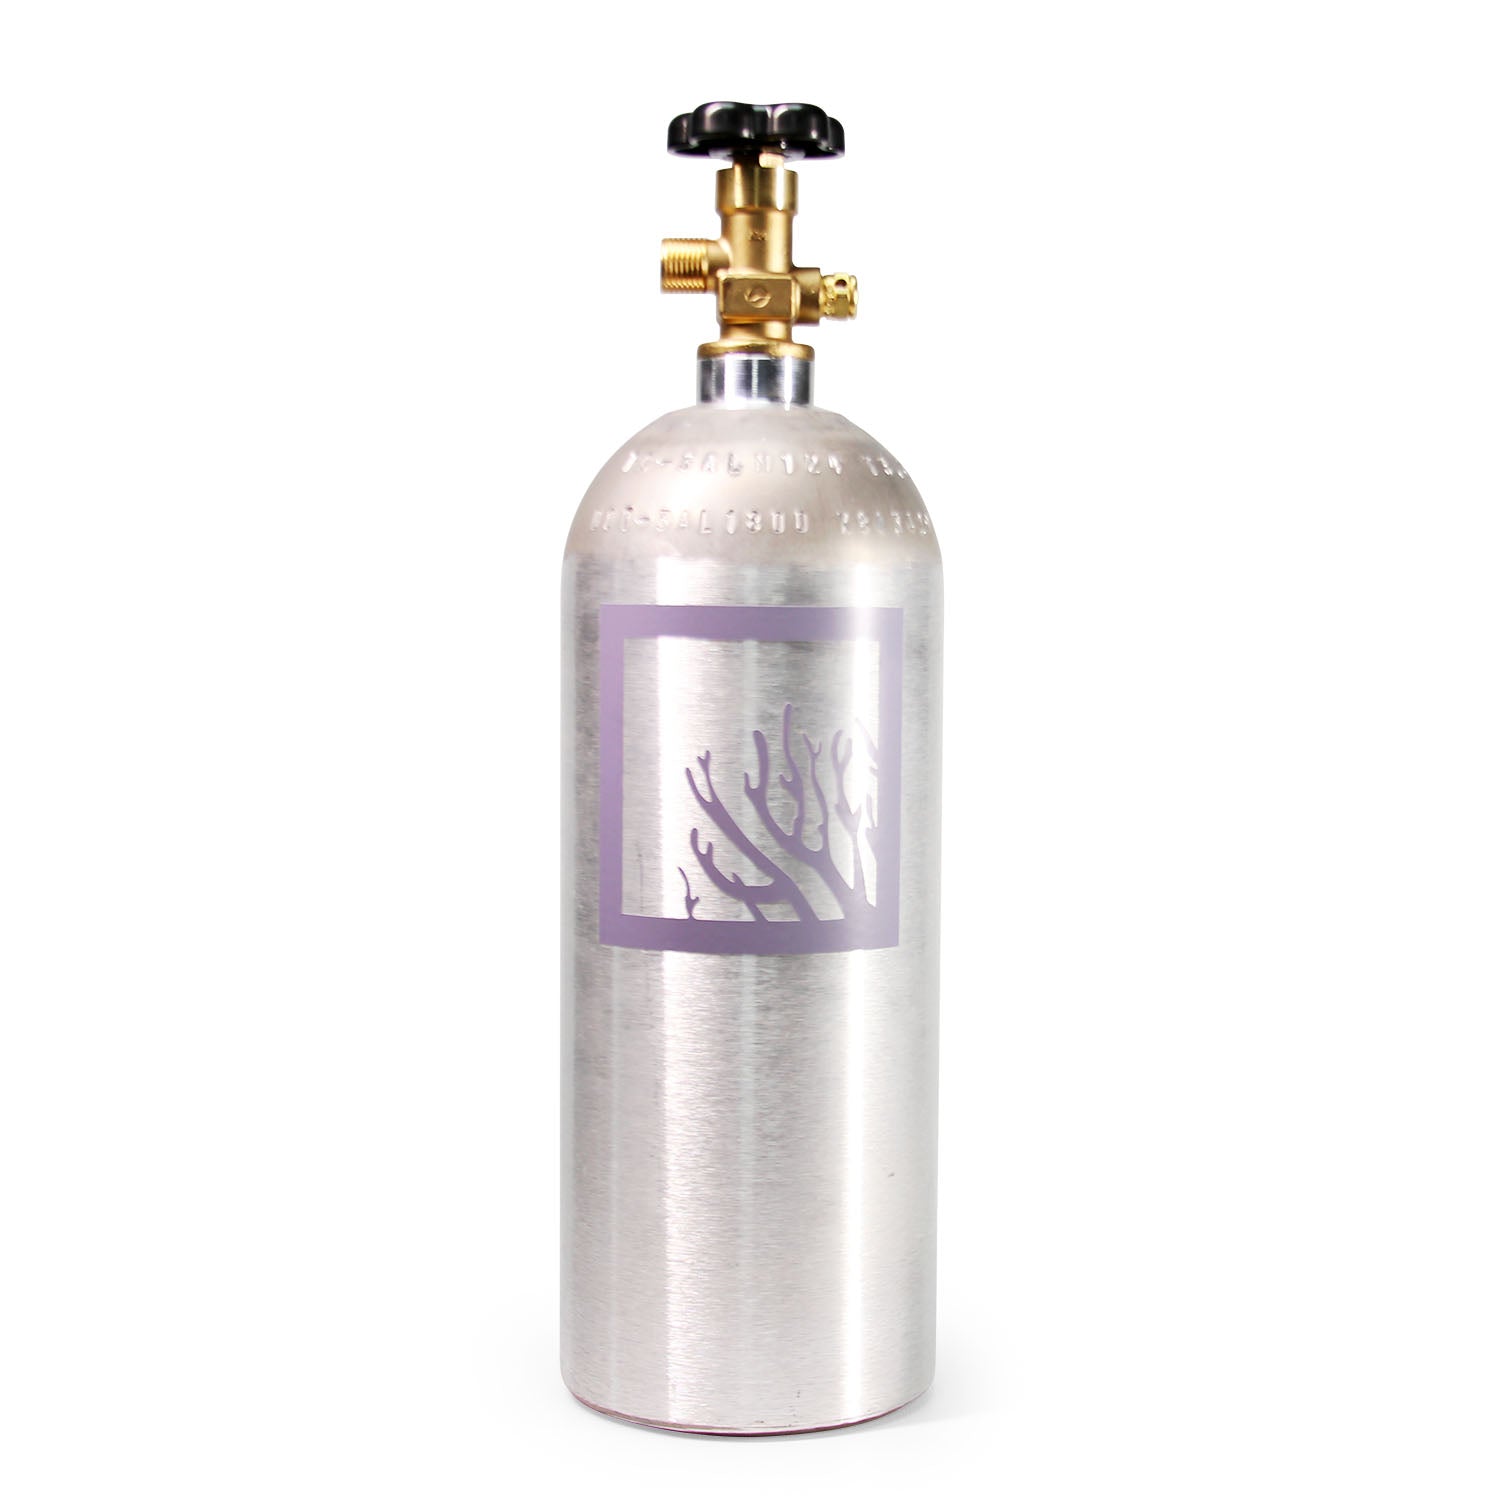 SR Aquaristik 5lbs CO2 Bottle Fill and Exchange (Pick Up Only)